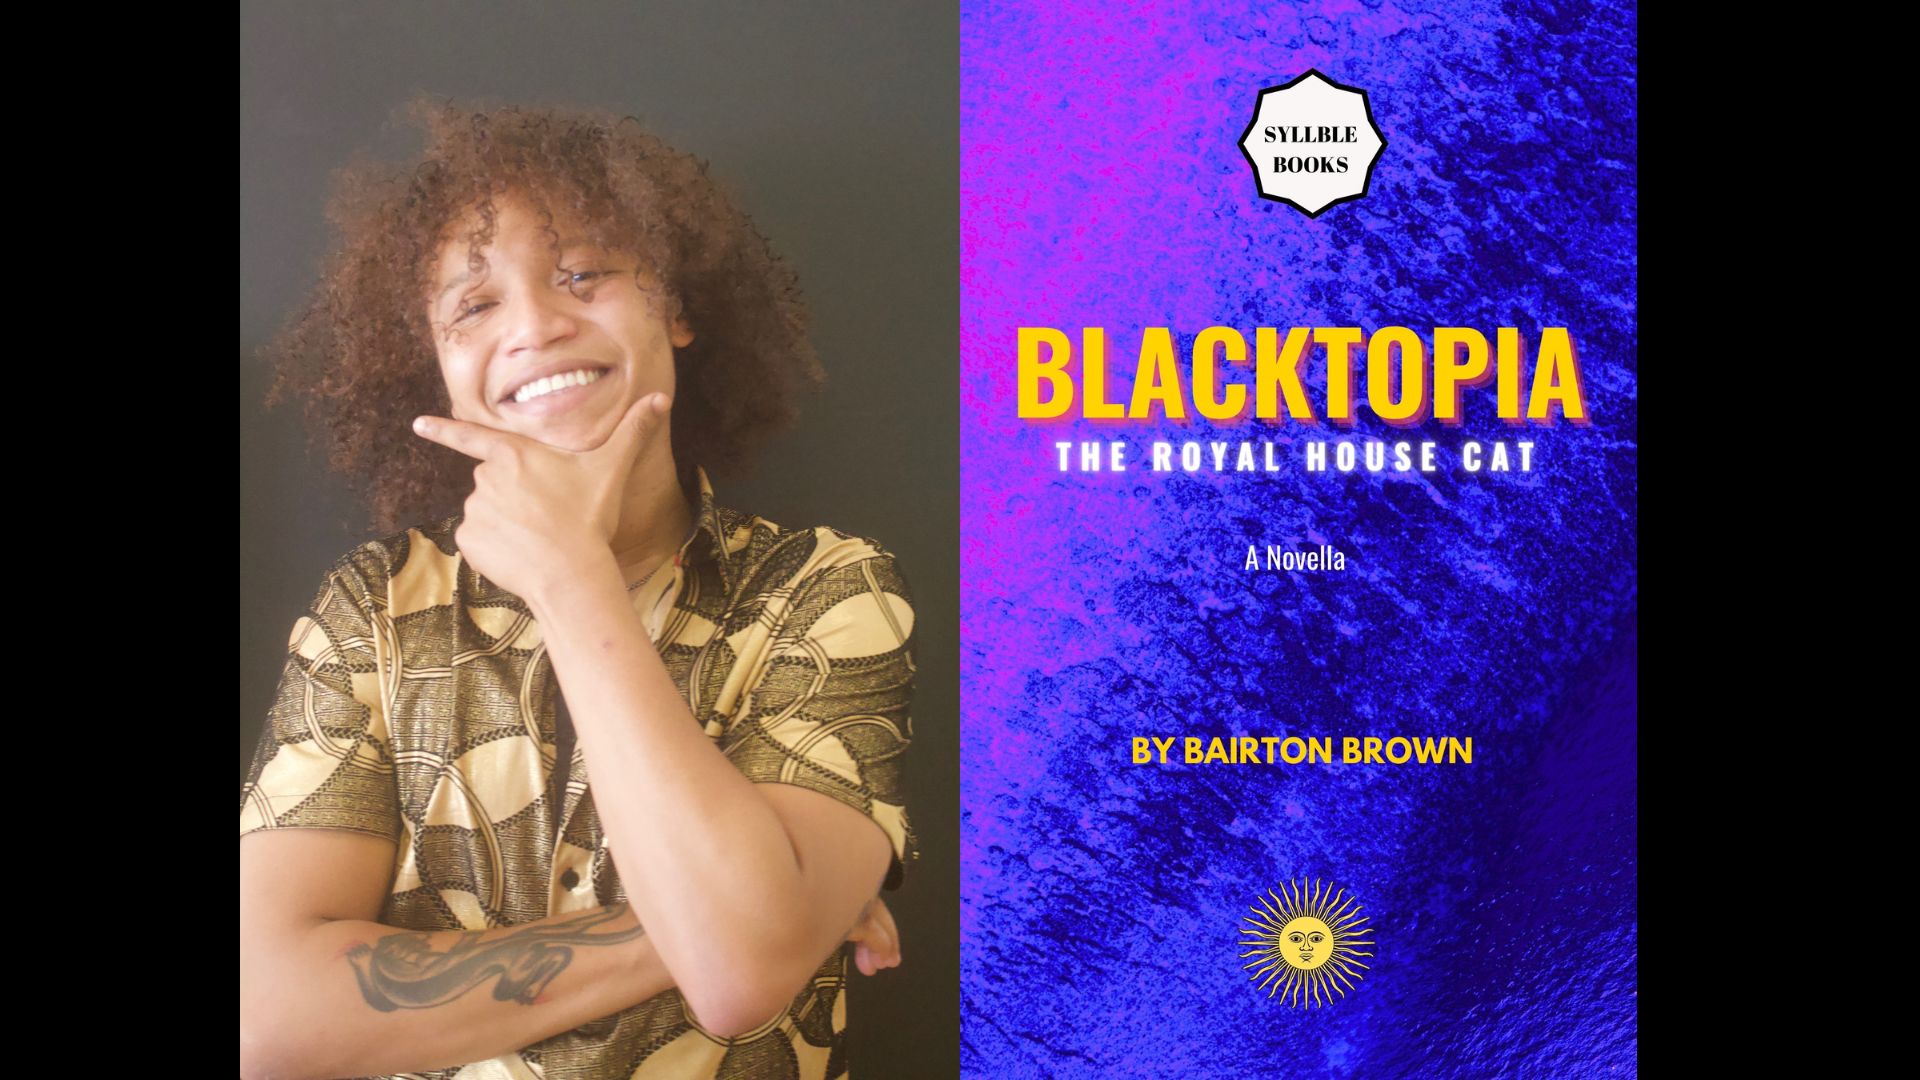 Debut Novella by Bairton Brown – Blacktopia: The Royal House Cat Publish on June 3rd by Syllble Books